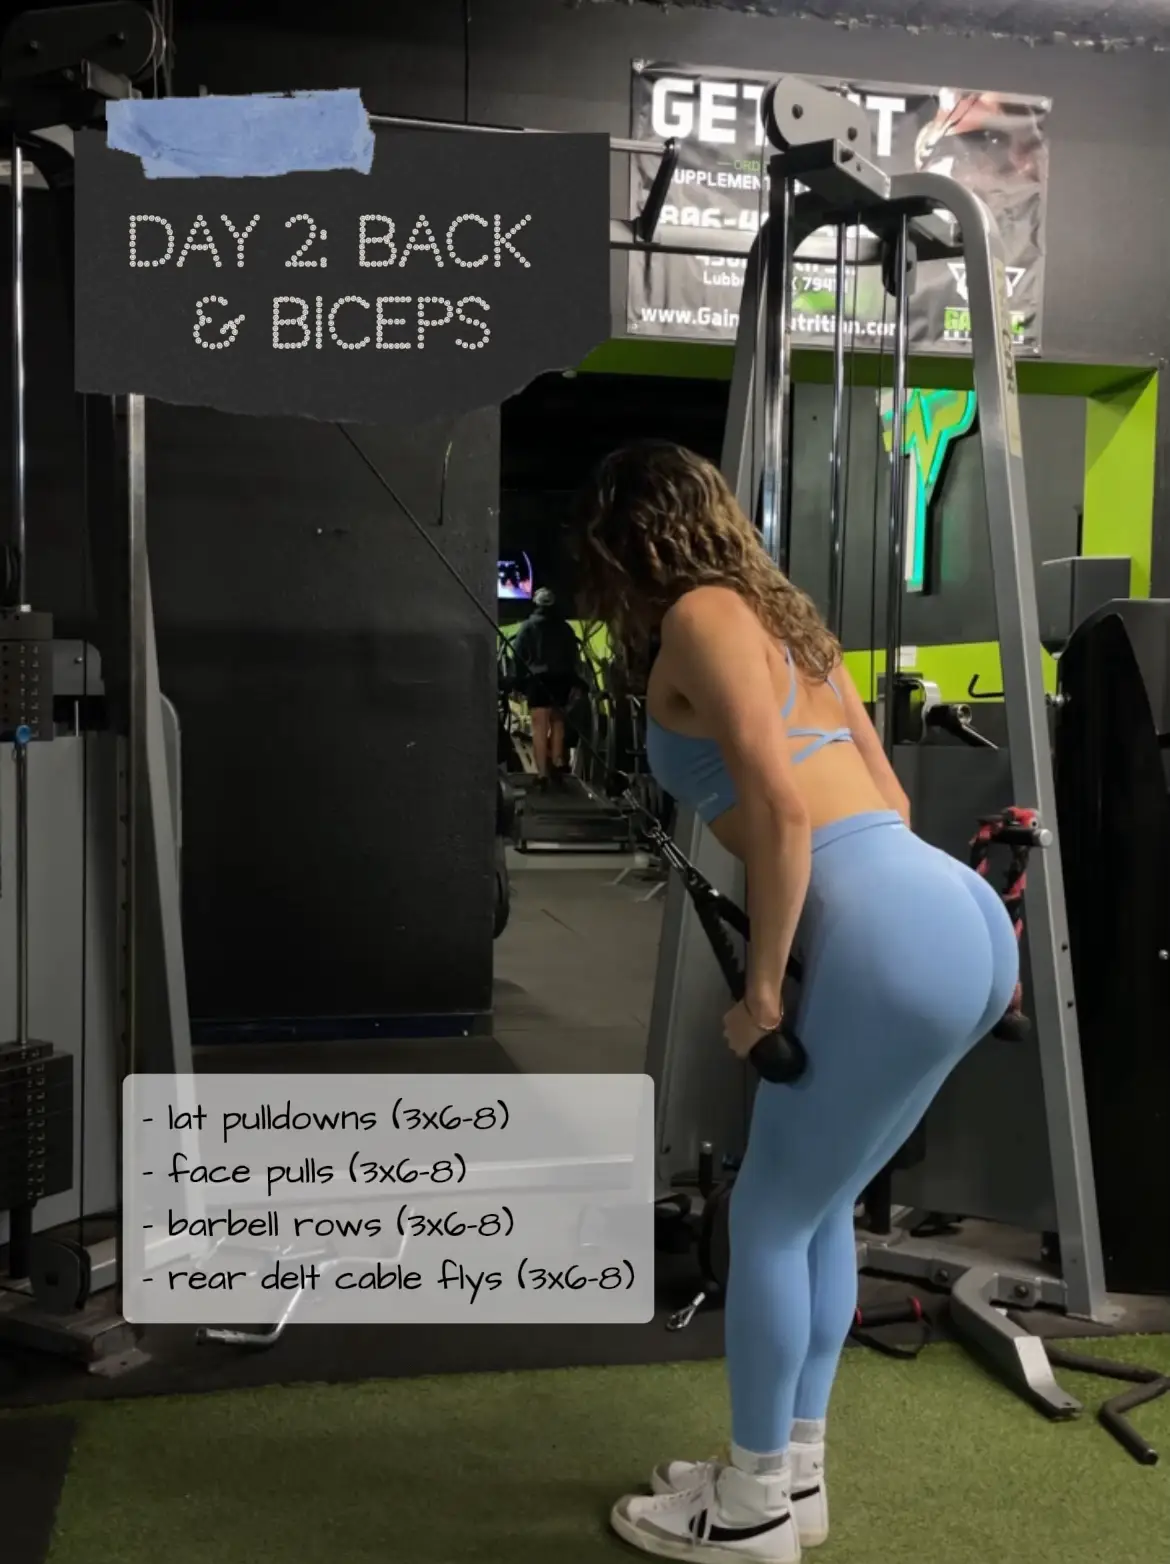 Easy lunges workout, save & try ❤️. #legday #gymgirl #strongwomen #gym